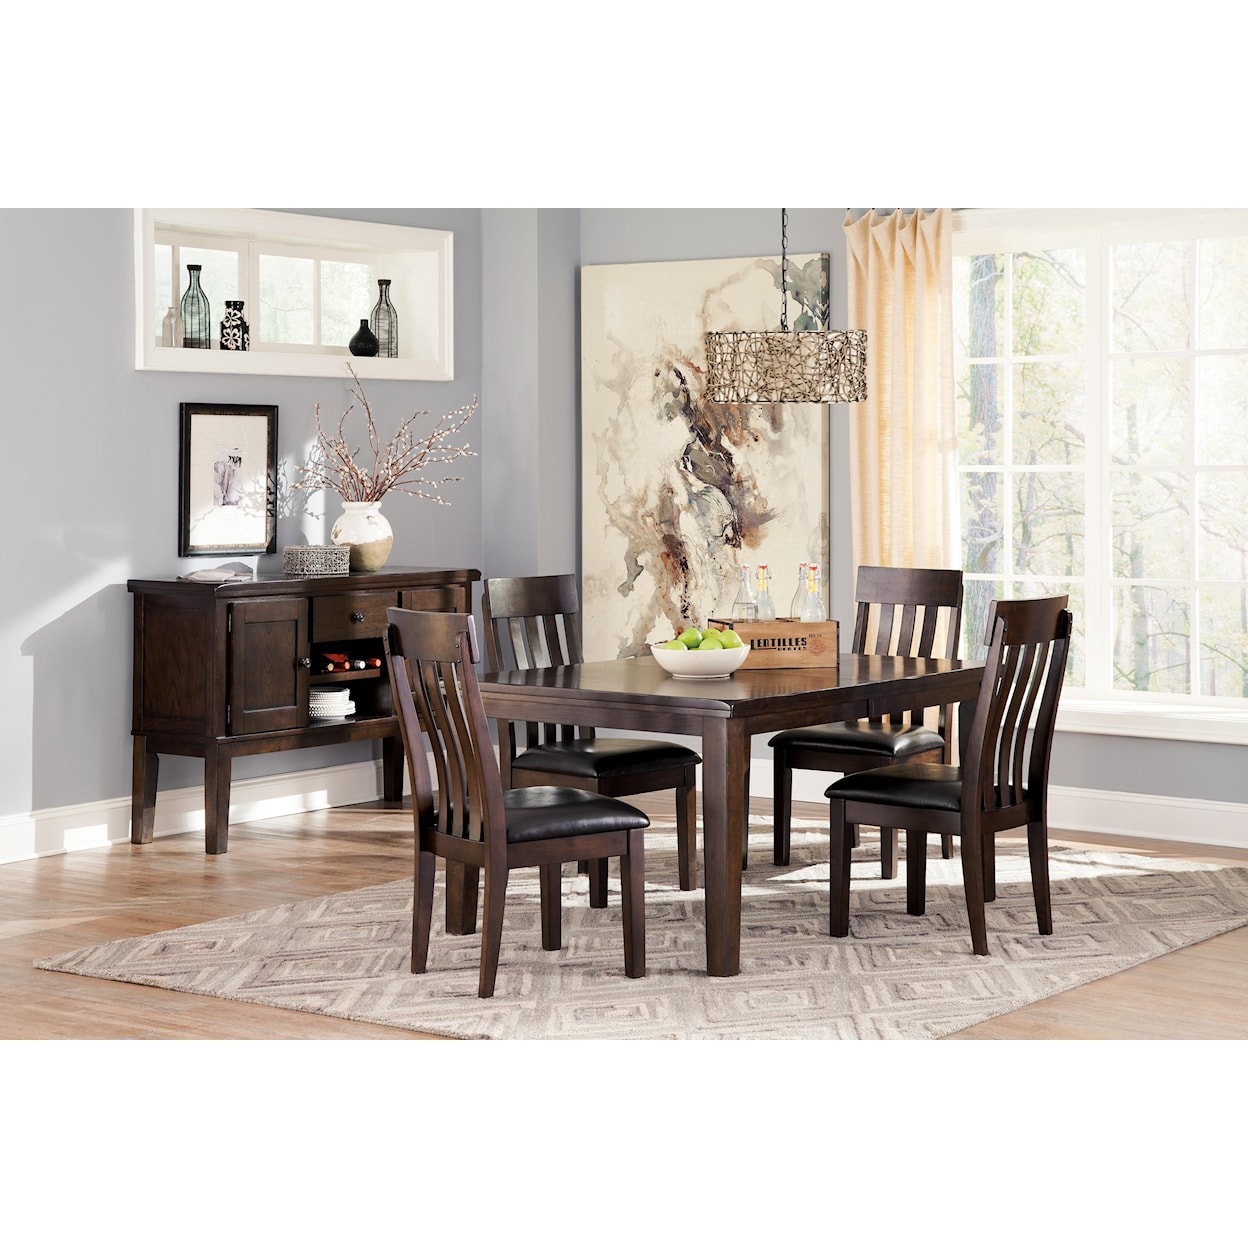 Signature Design by Ashley Furniture Haddigan 5-Piece Dining Room Table & Side Chair Set